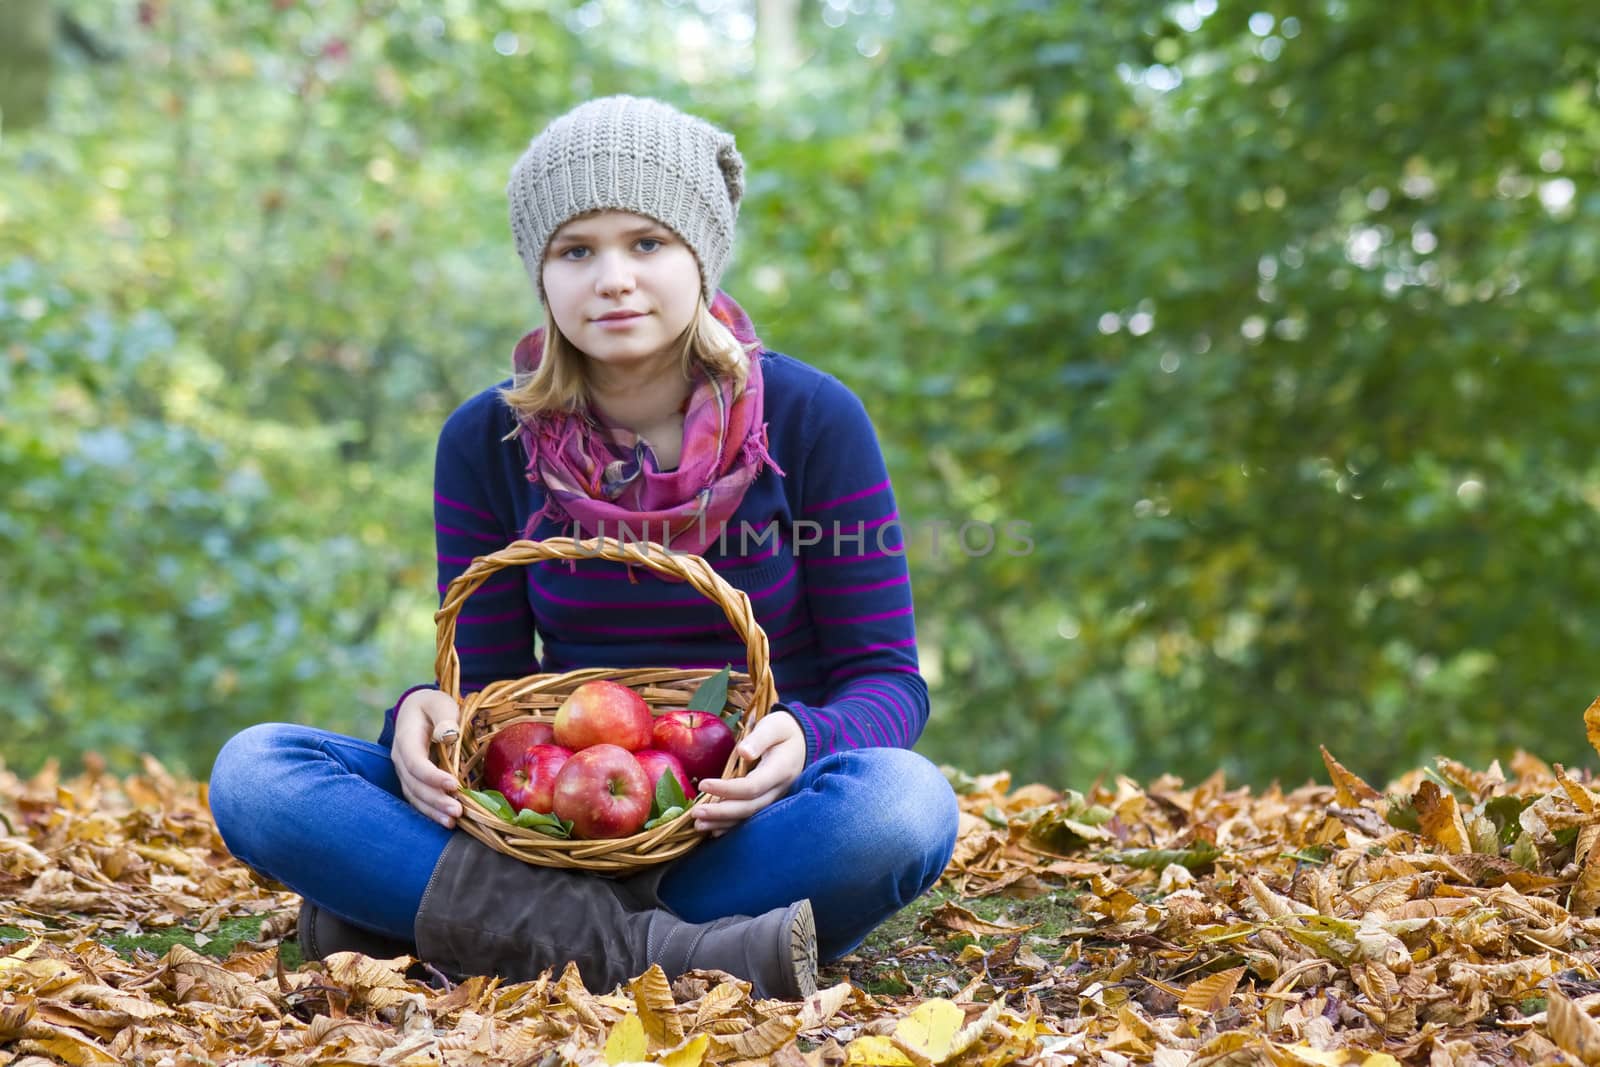 young girl with basket of apples in autumn garden by miradrozdowski